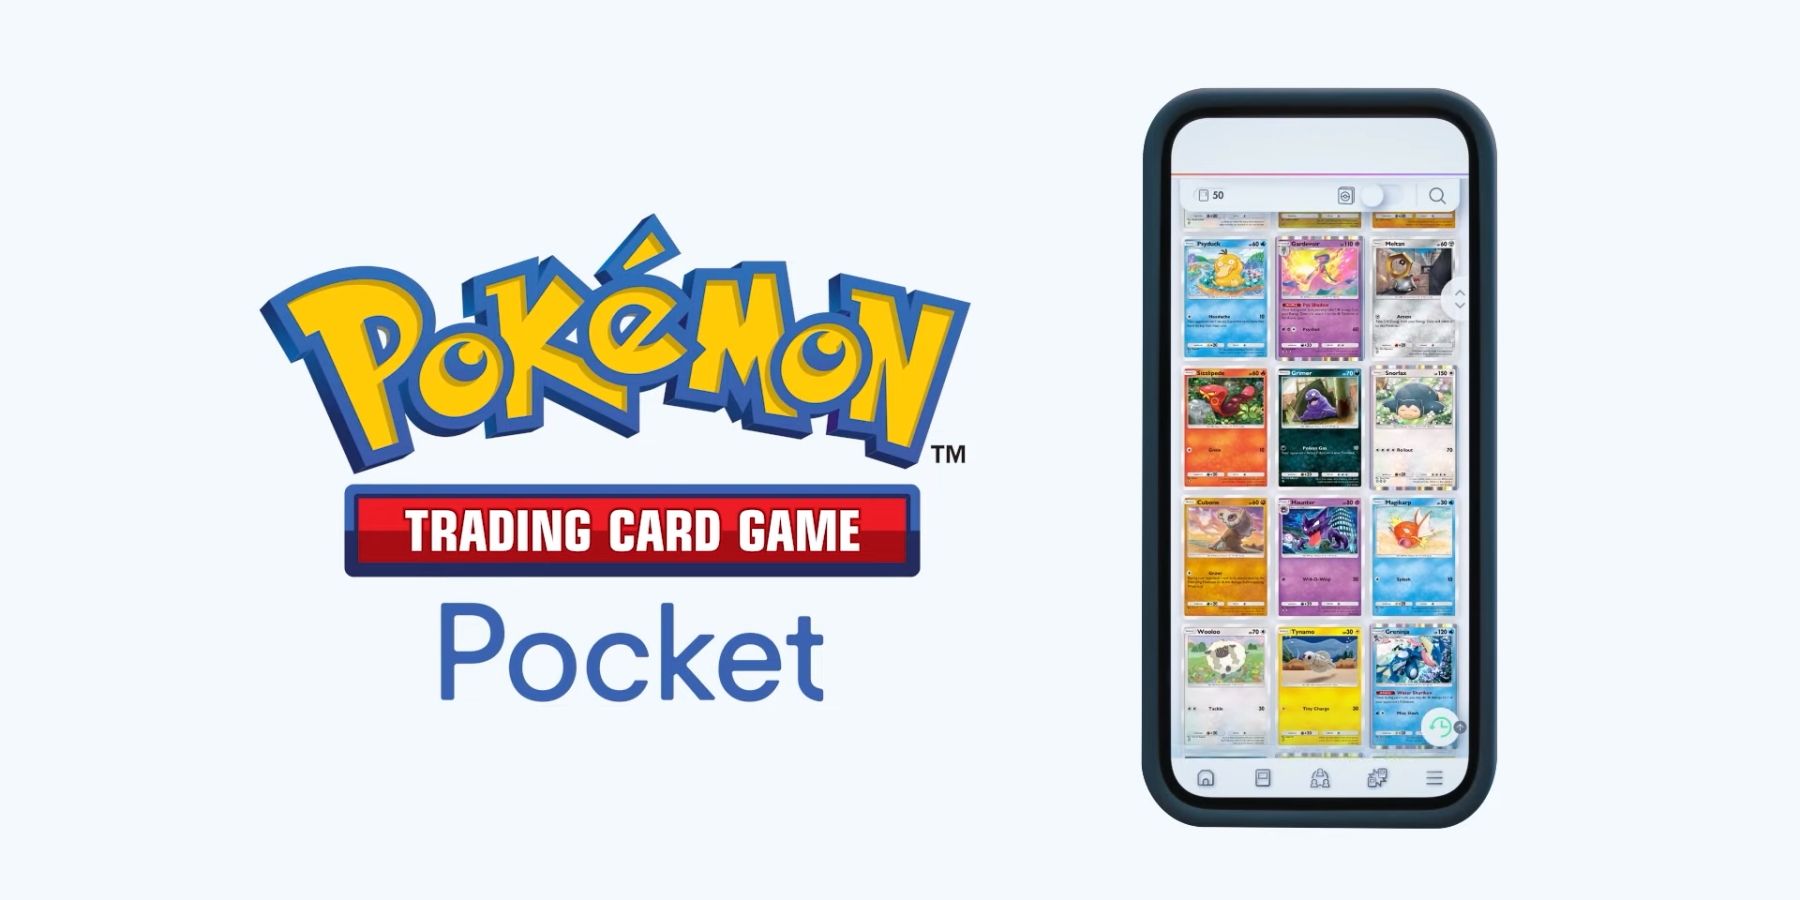 A screenshot from the title reveal for Pokemon Trading Card Game Pocket.